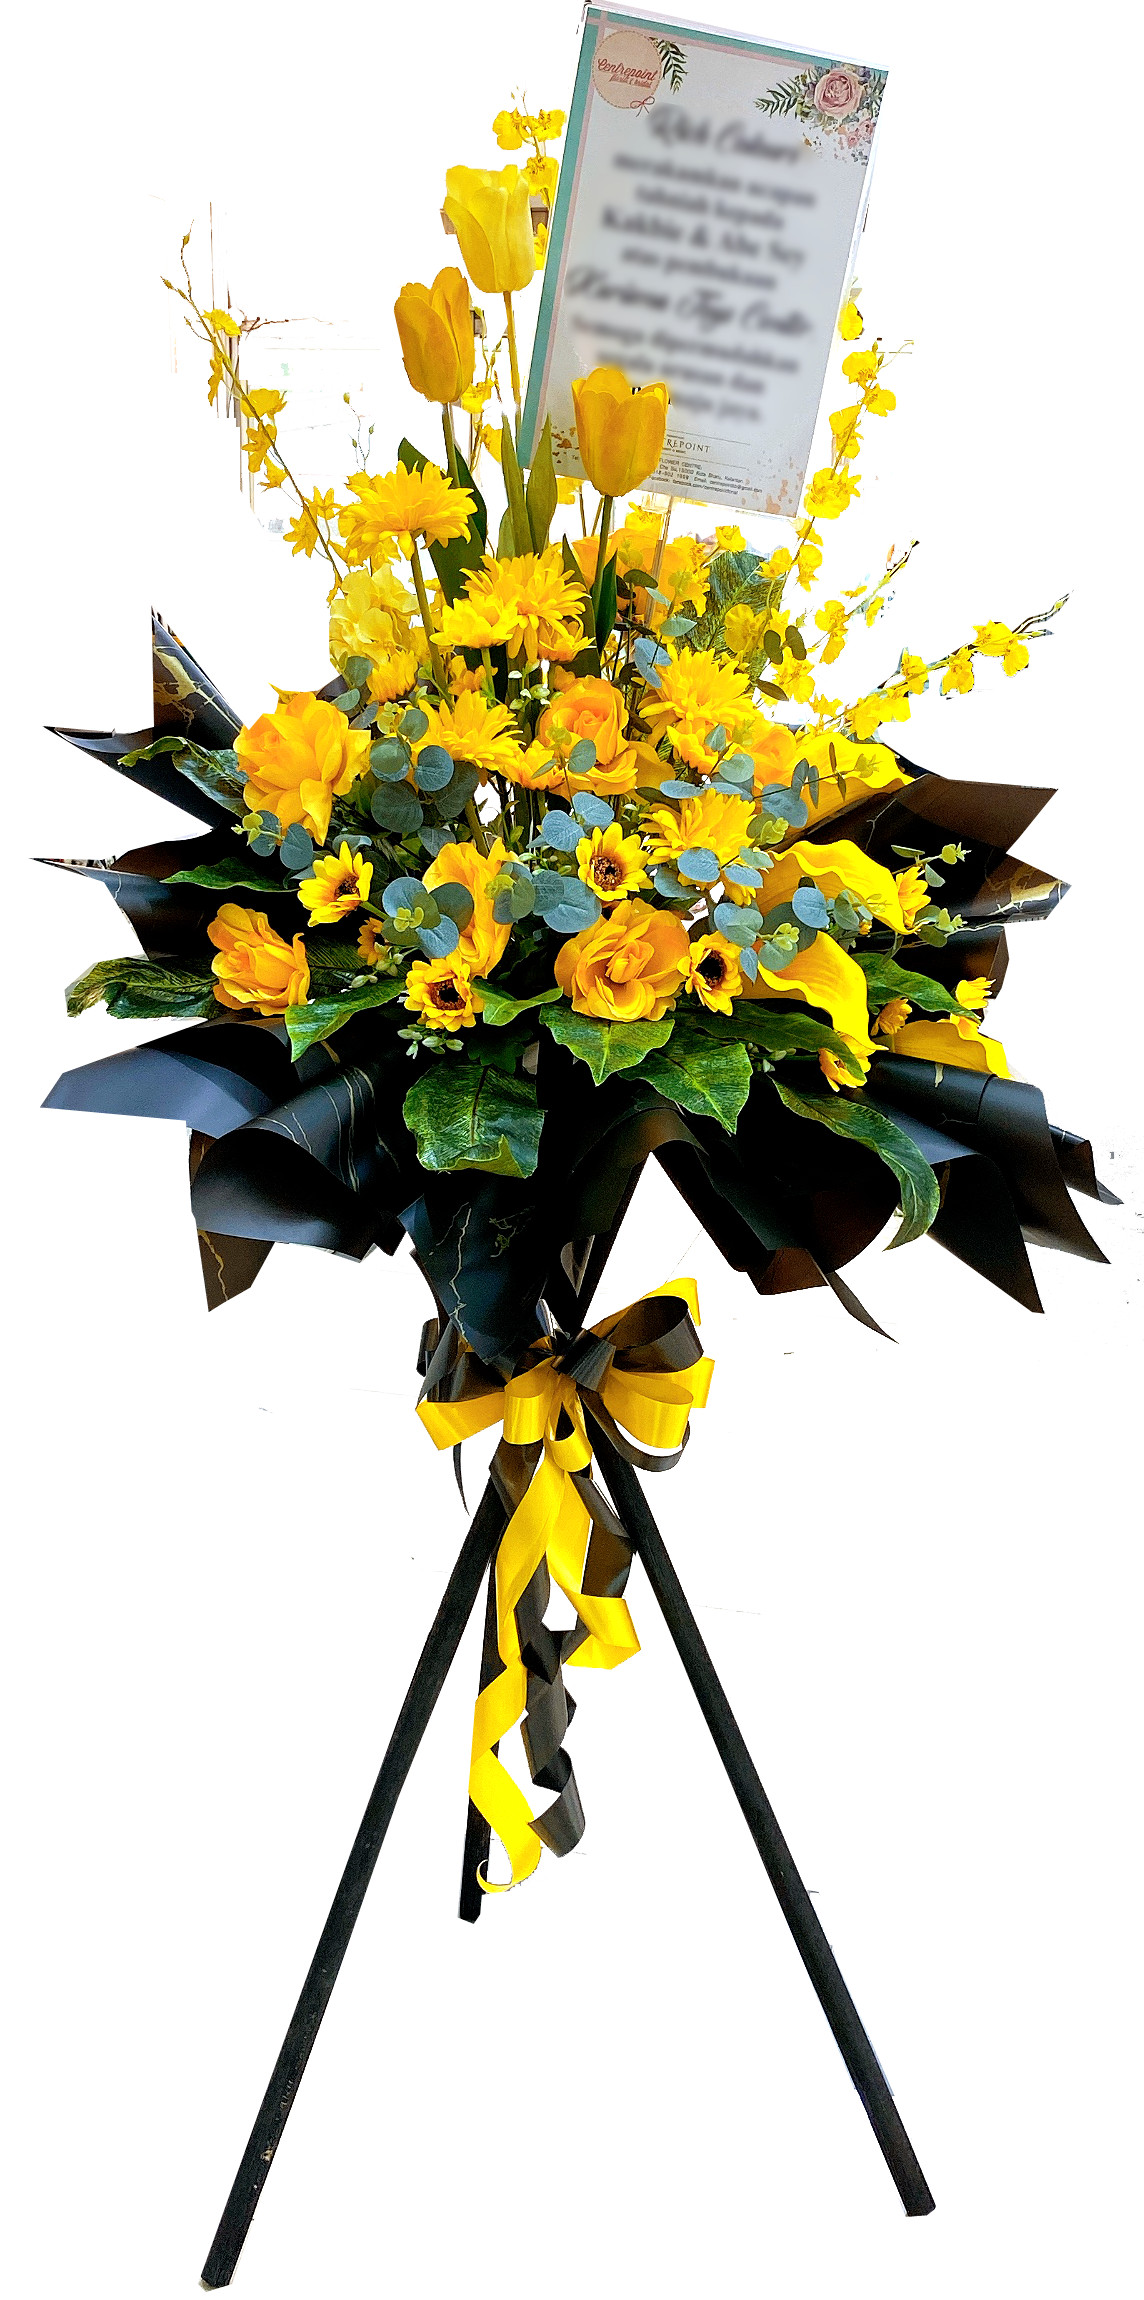 Opening Stand 064 - ARTIFICIAL FLOWER (RM 200.00)